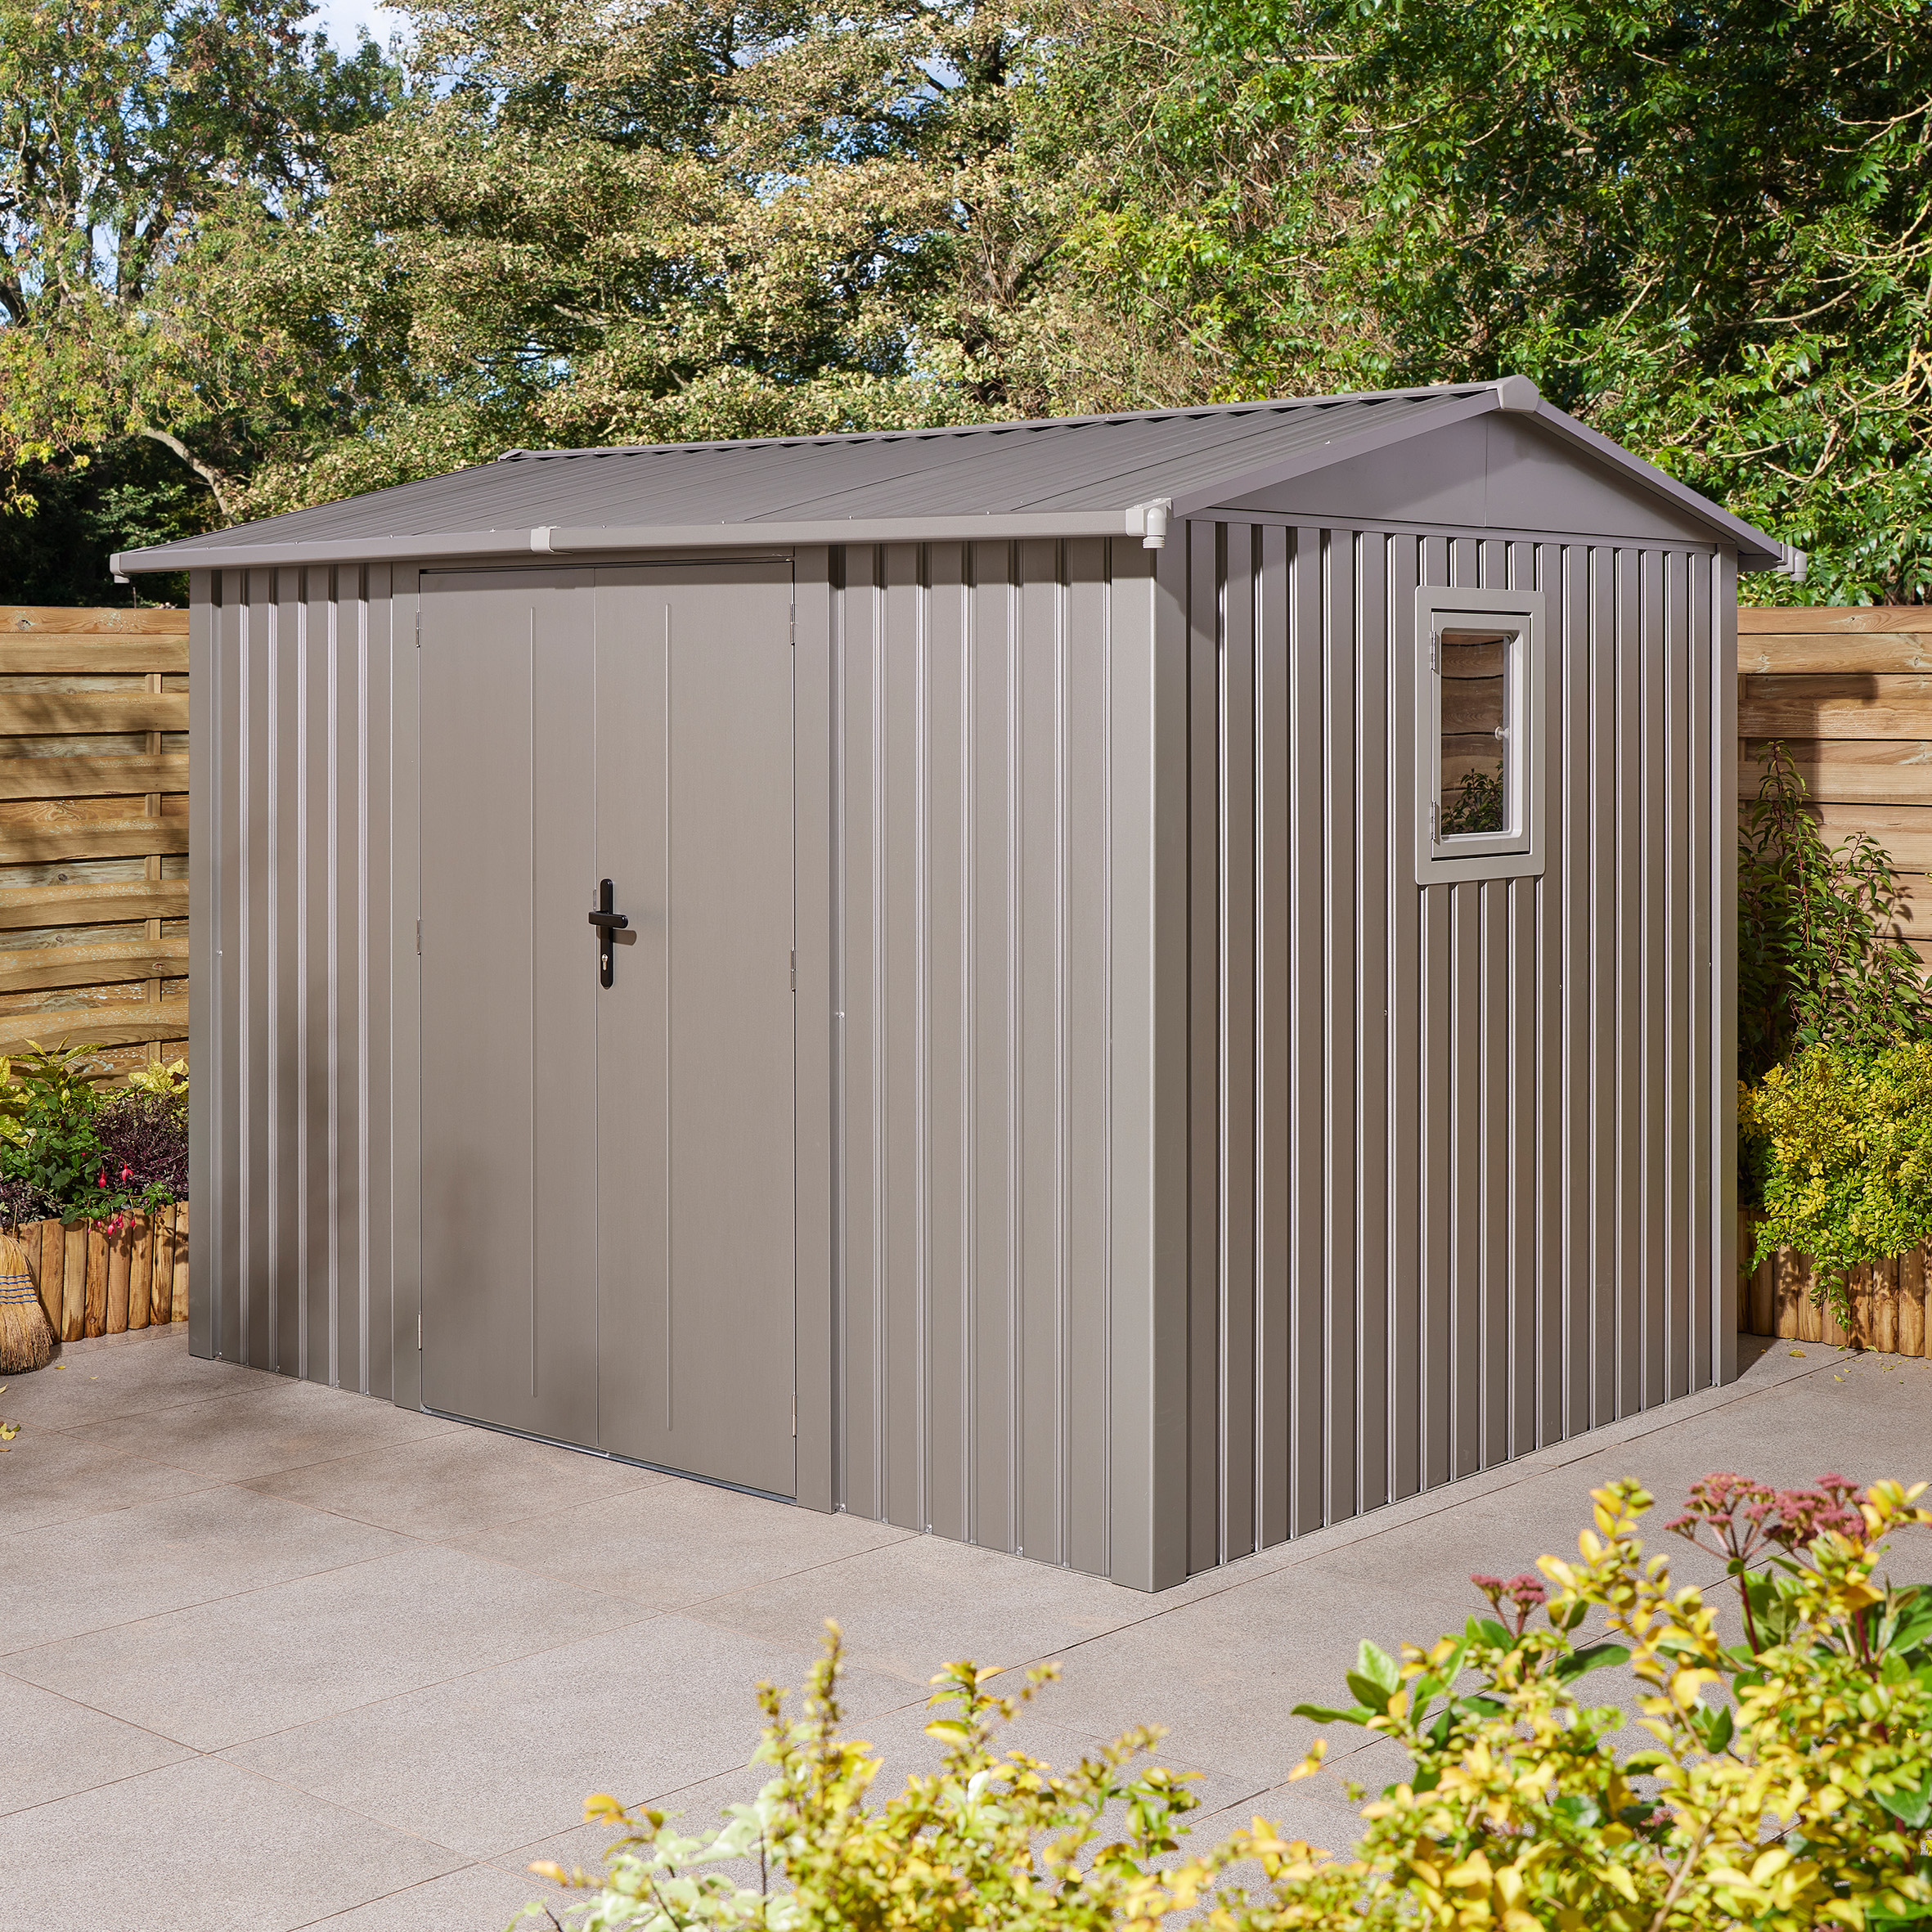 Featured image for “Brentvale Premium 10x8 Metal Shed”